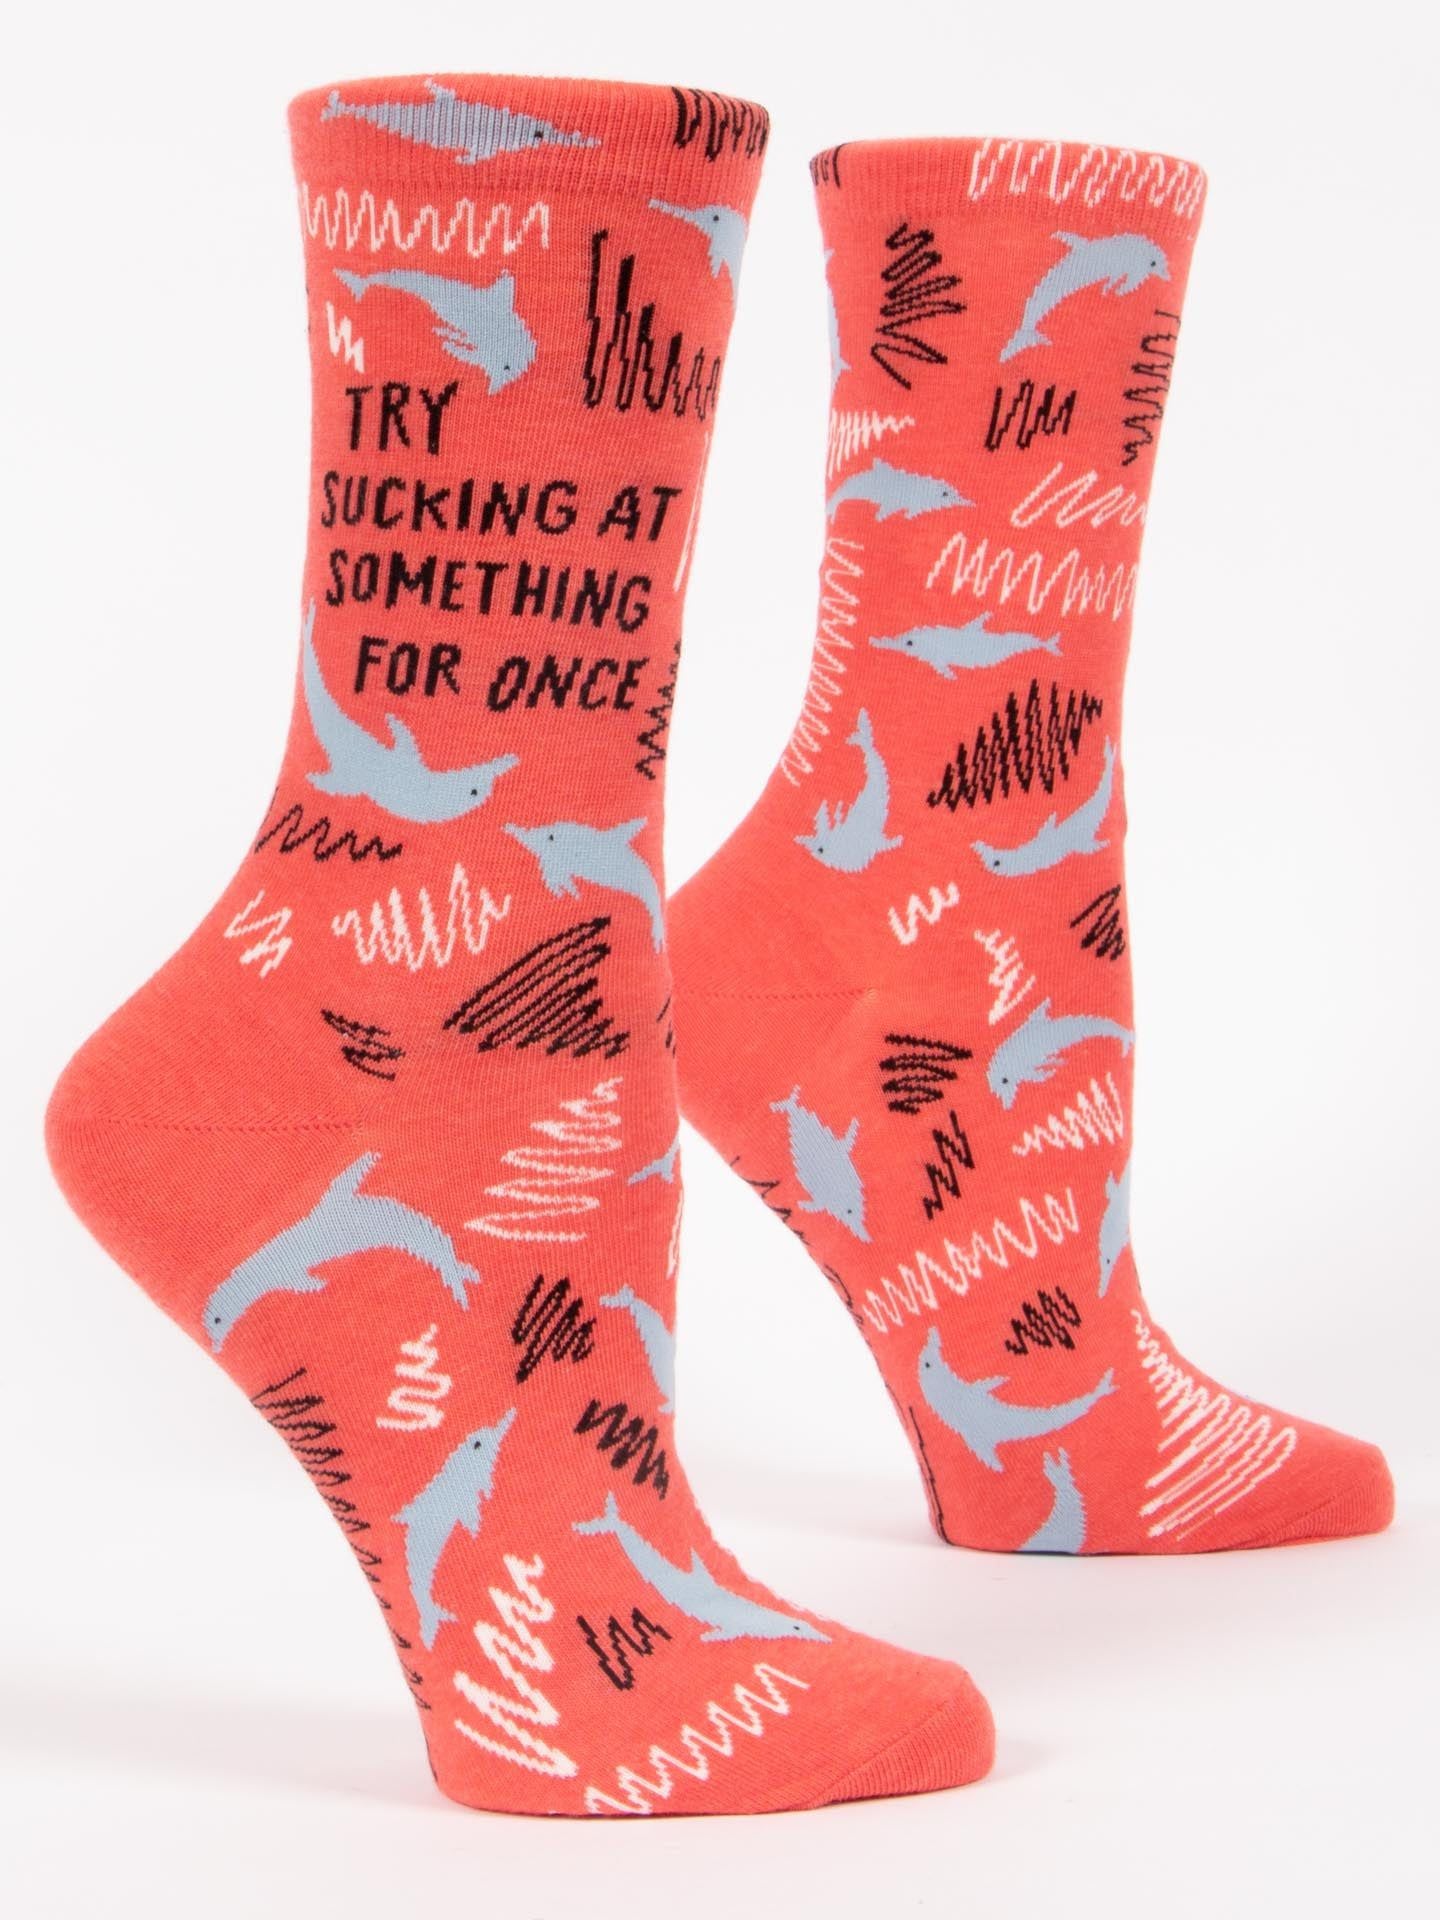 Try Sucking At Something For Once Women's Crew Socks-Apparel > Apparel & Accessories > Clothing > Underwear & Socks-Quinn's Mercantile